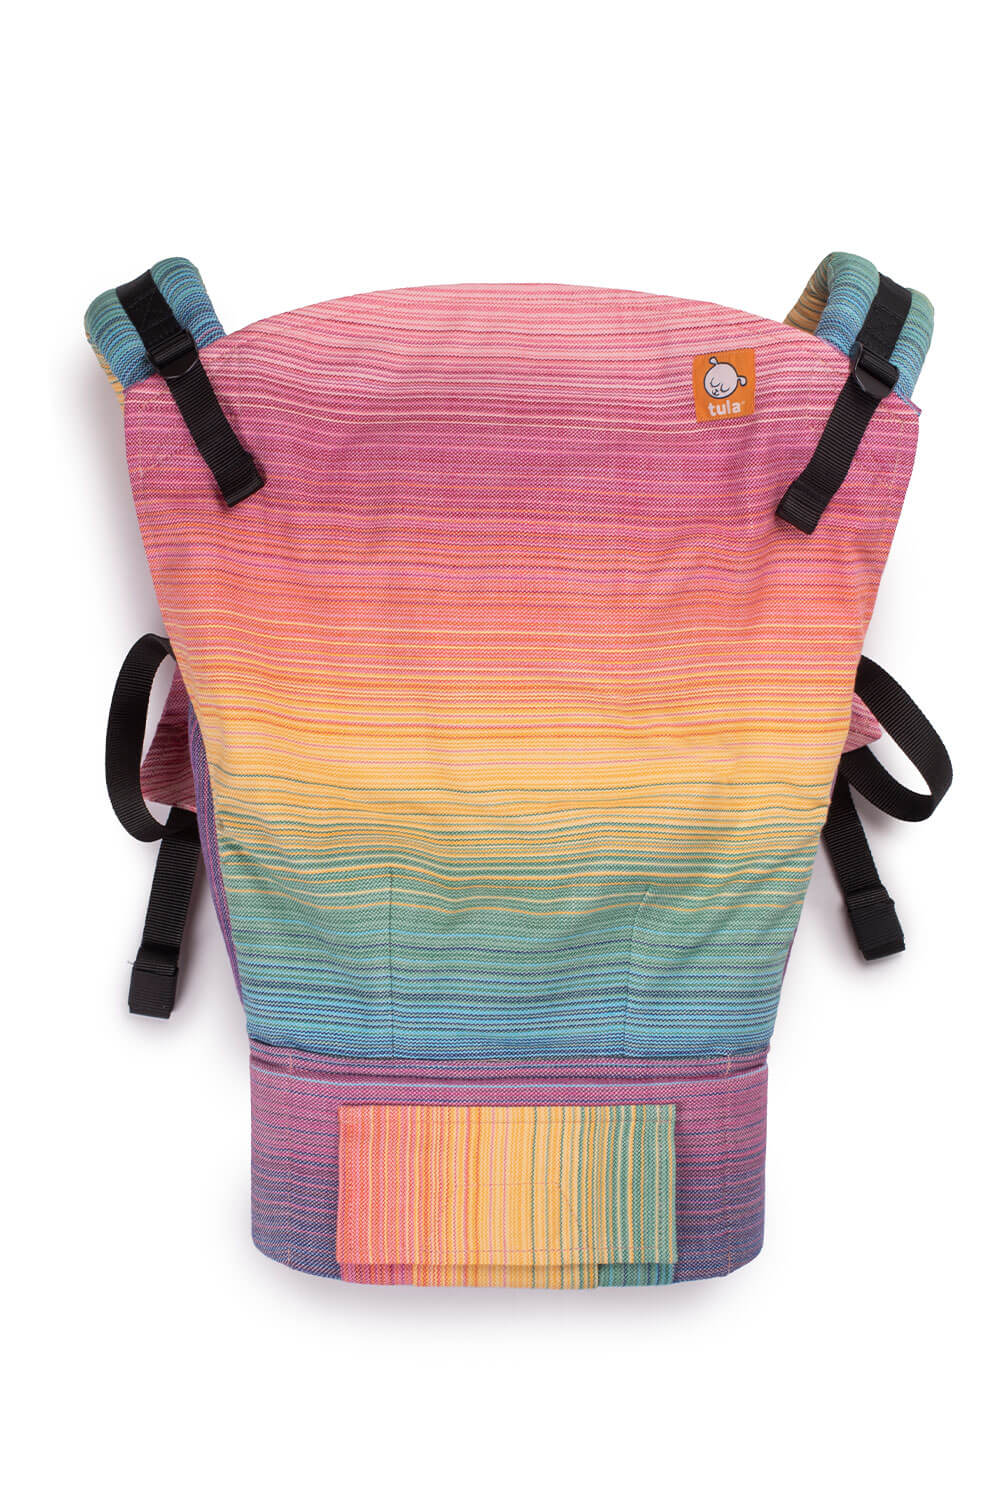 Goldie - Signature Handwoven Toddler Carrier